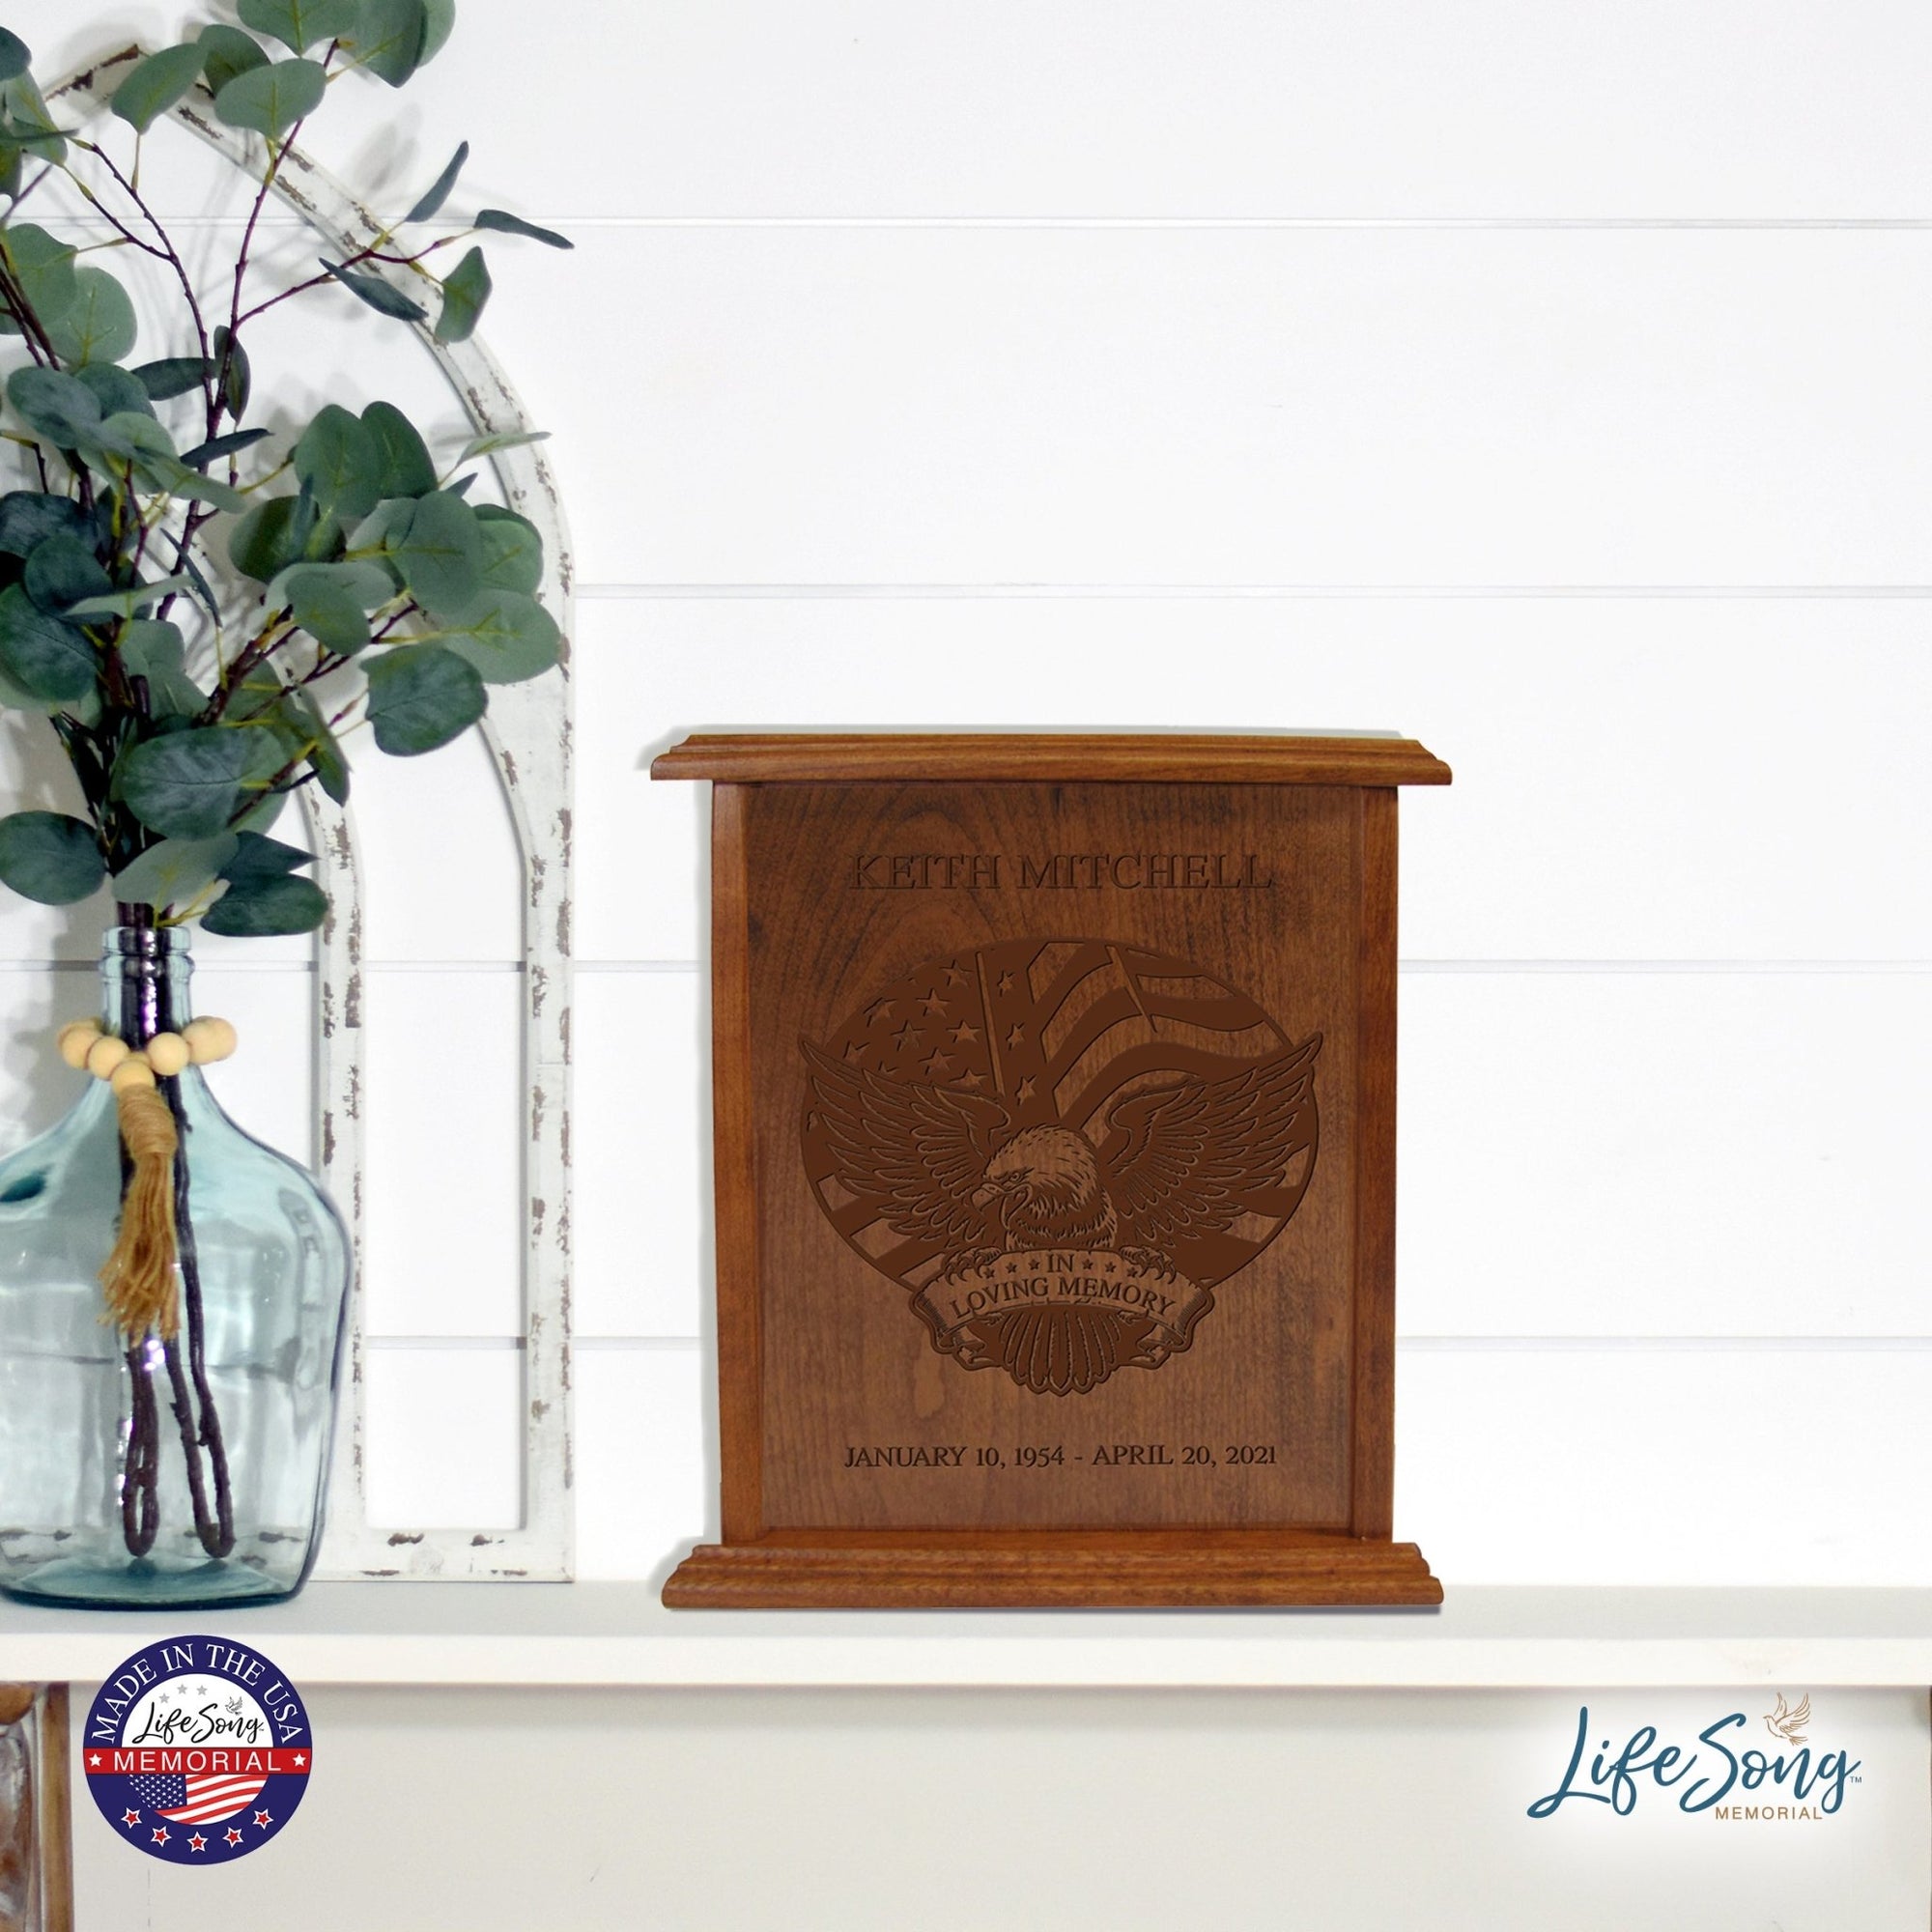 Custom Engraved Memorial Cherry Cremation Urn Box Holds 272 Cu Inches Of Human Ashes - In Loving Memory - LifeSong Milestones